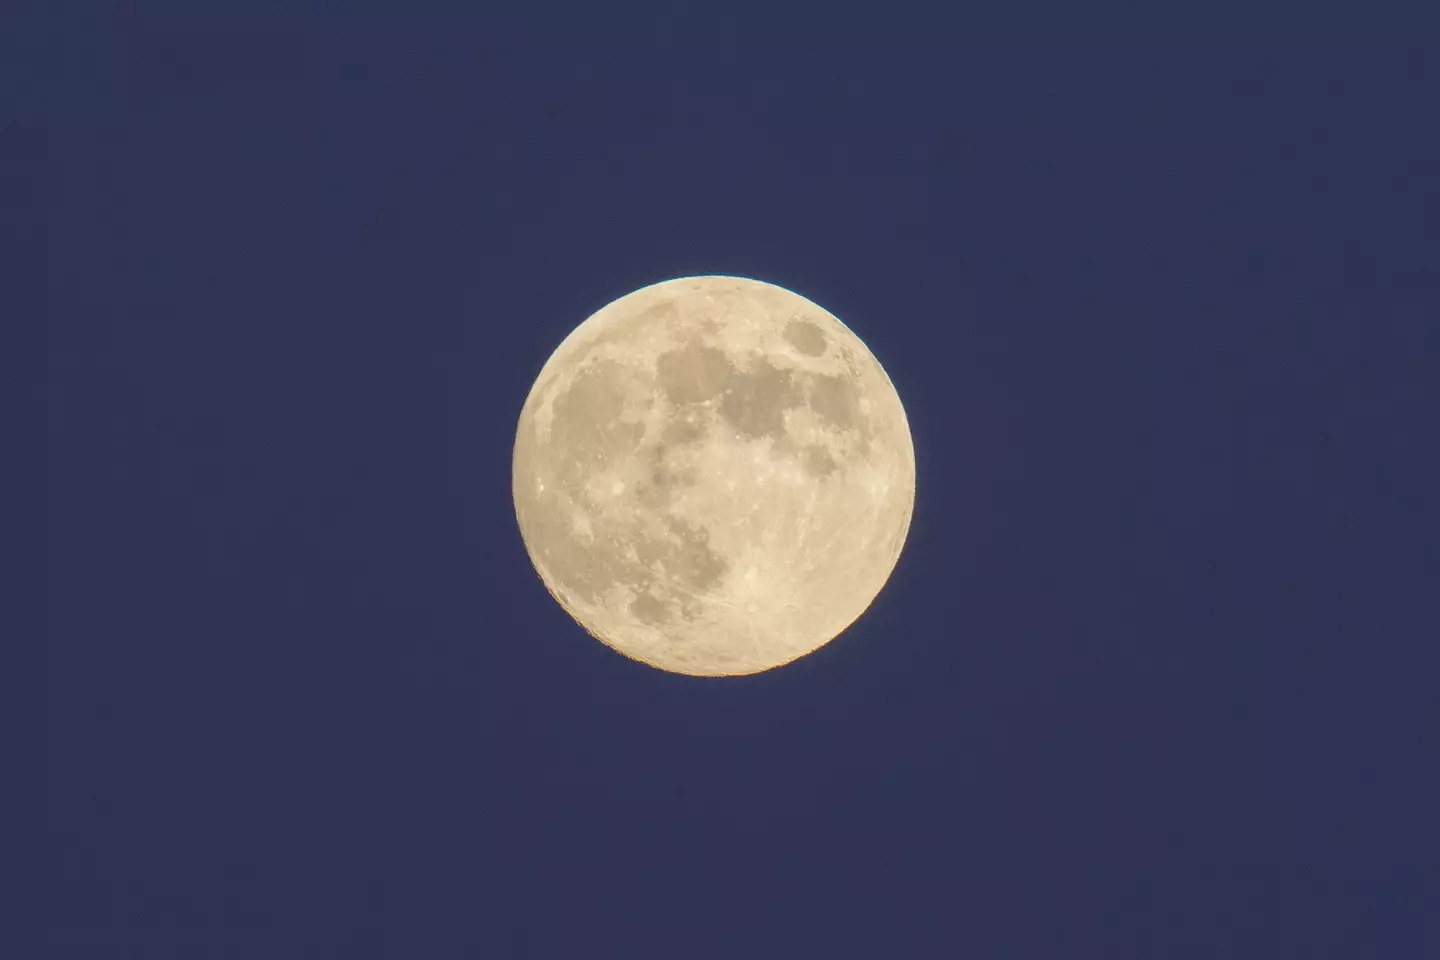 Brits can get a glimpse of the extraordinary Beaver Moon today.